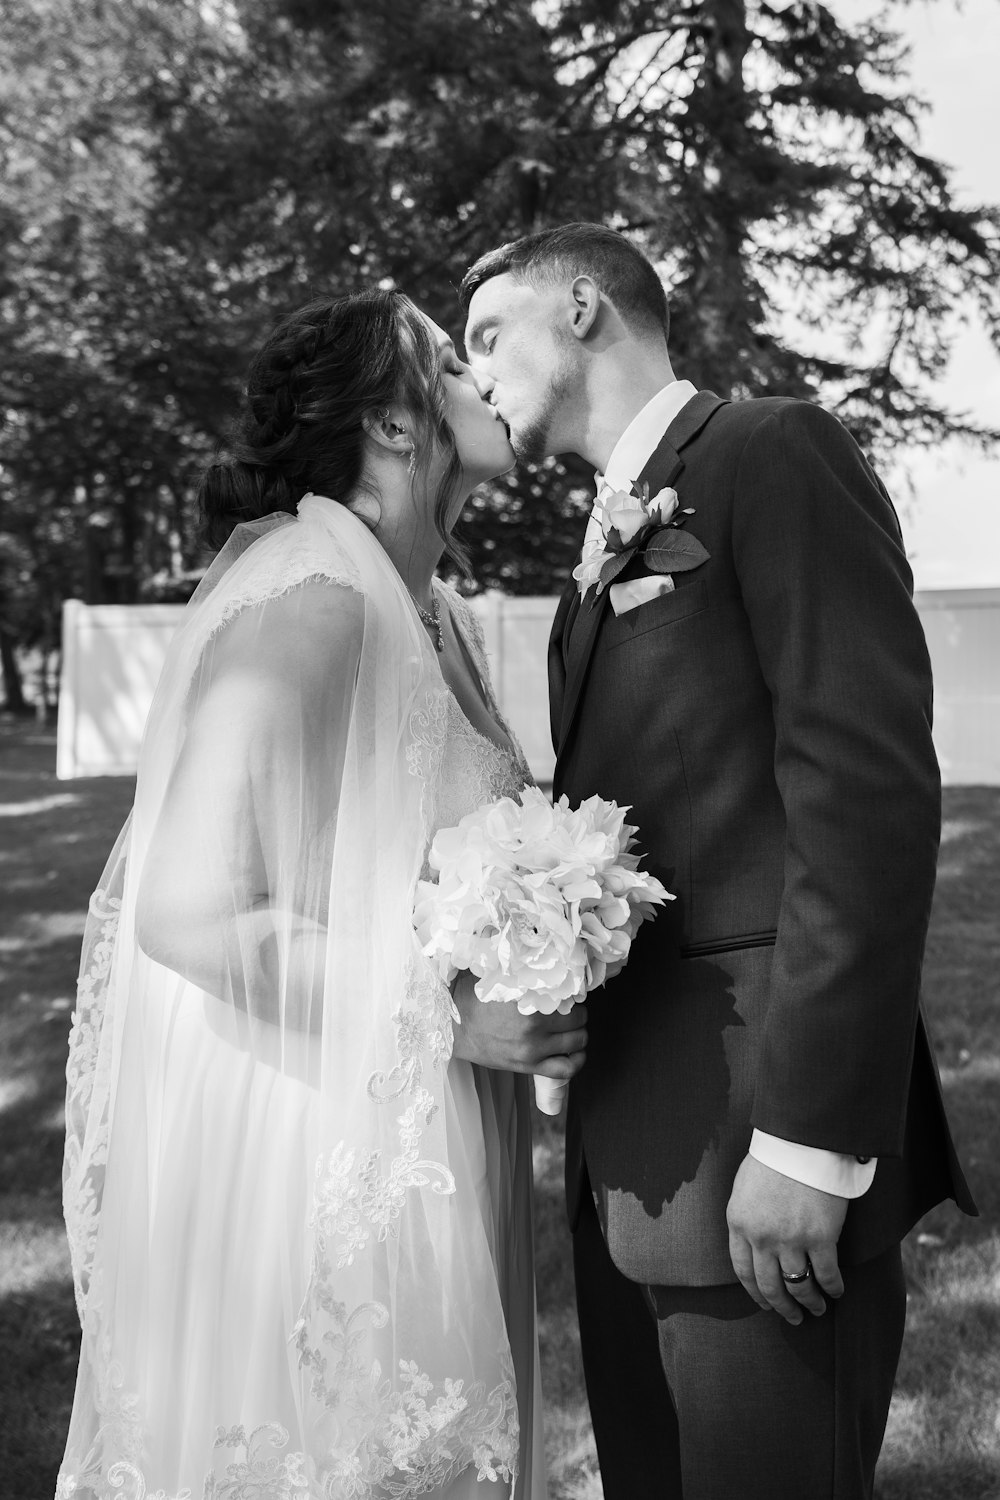 grayscale photo of bride and groom in wedding dress